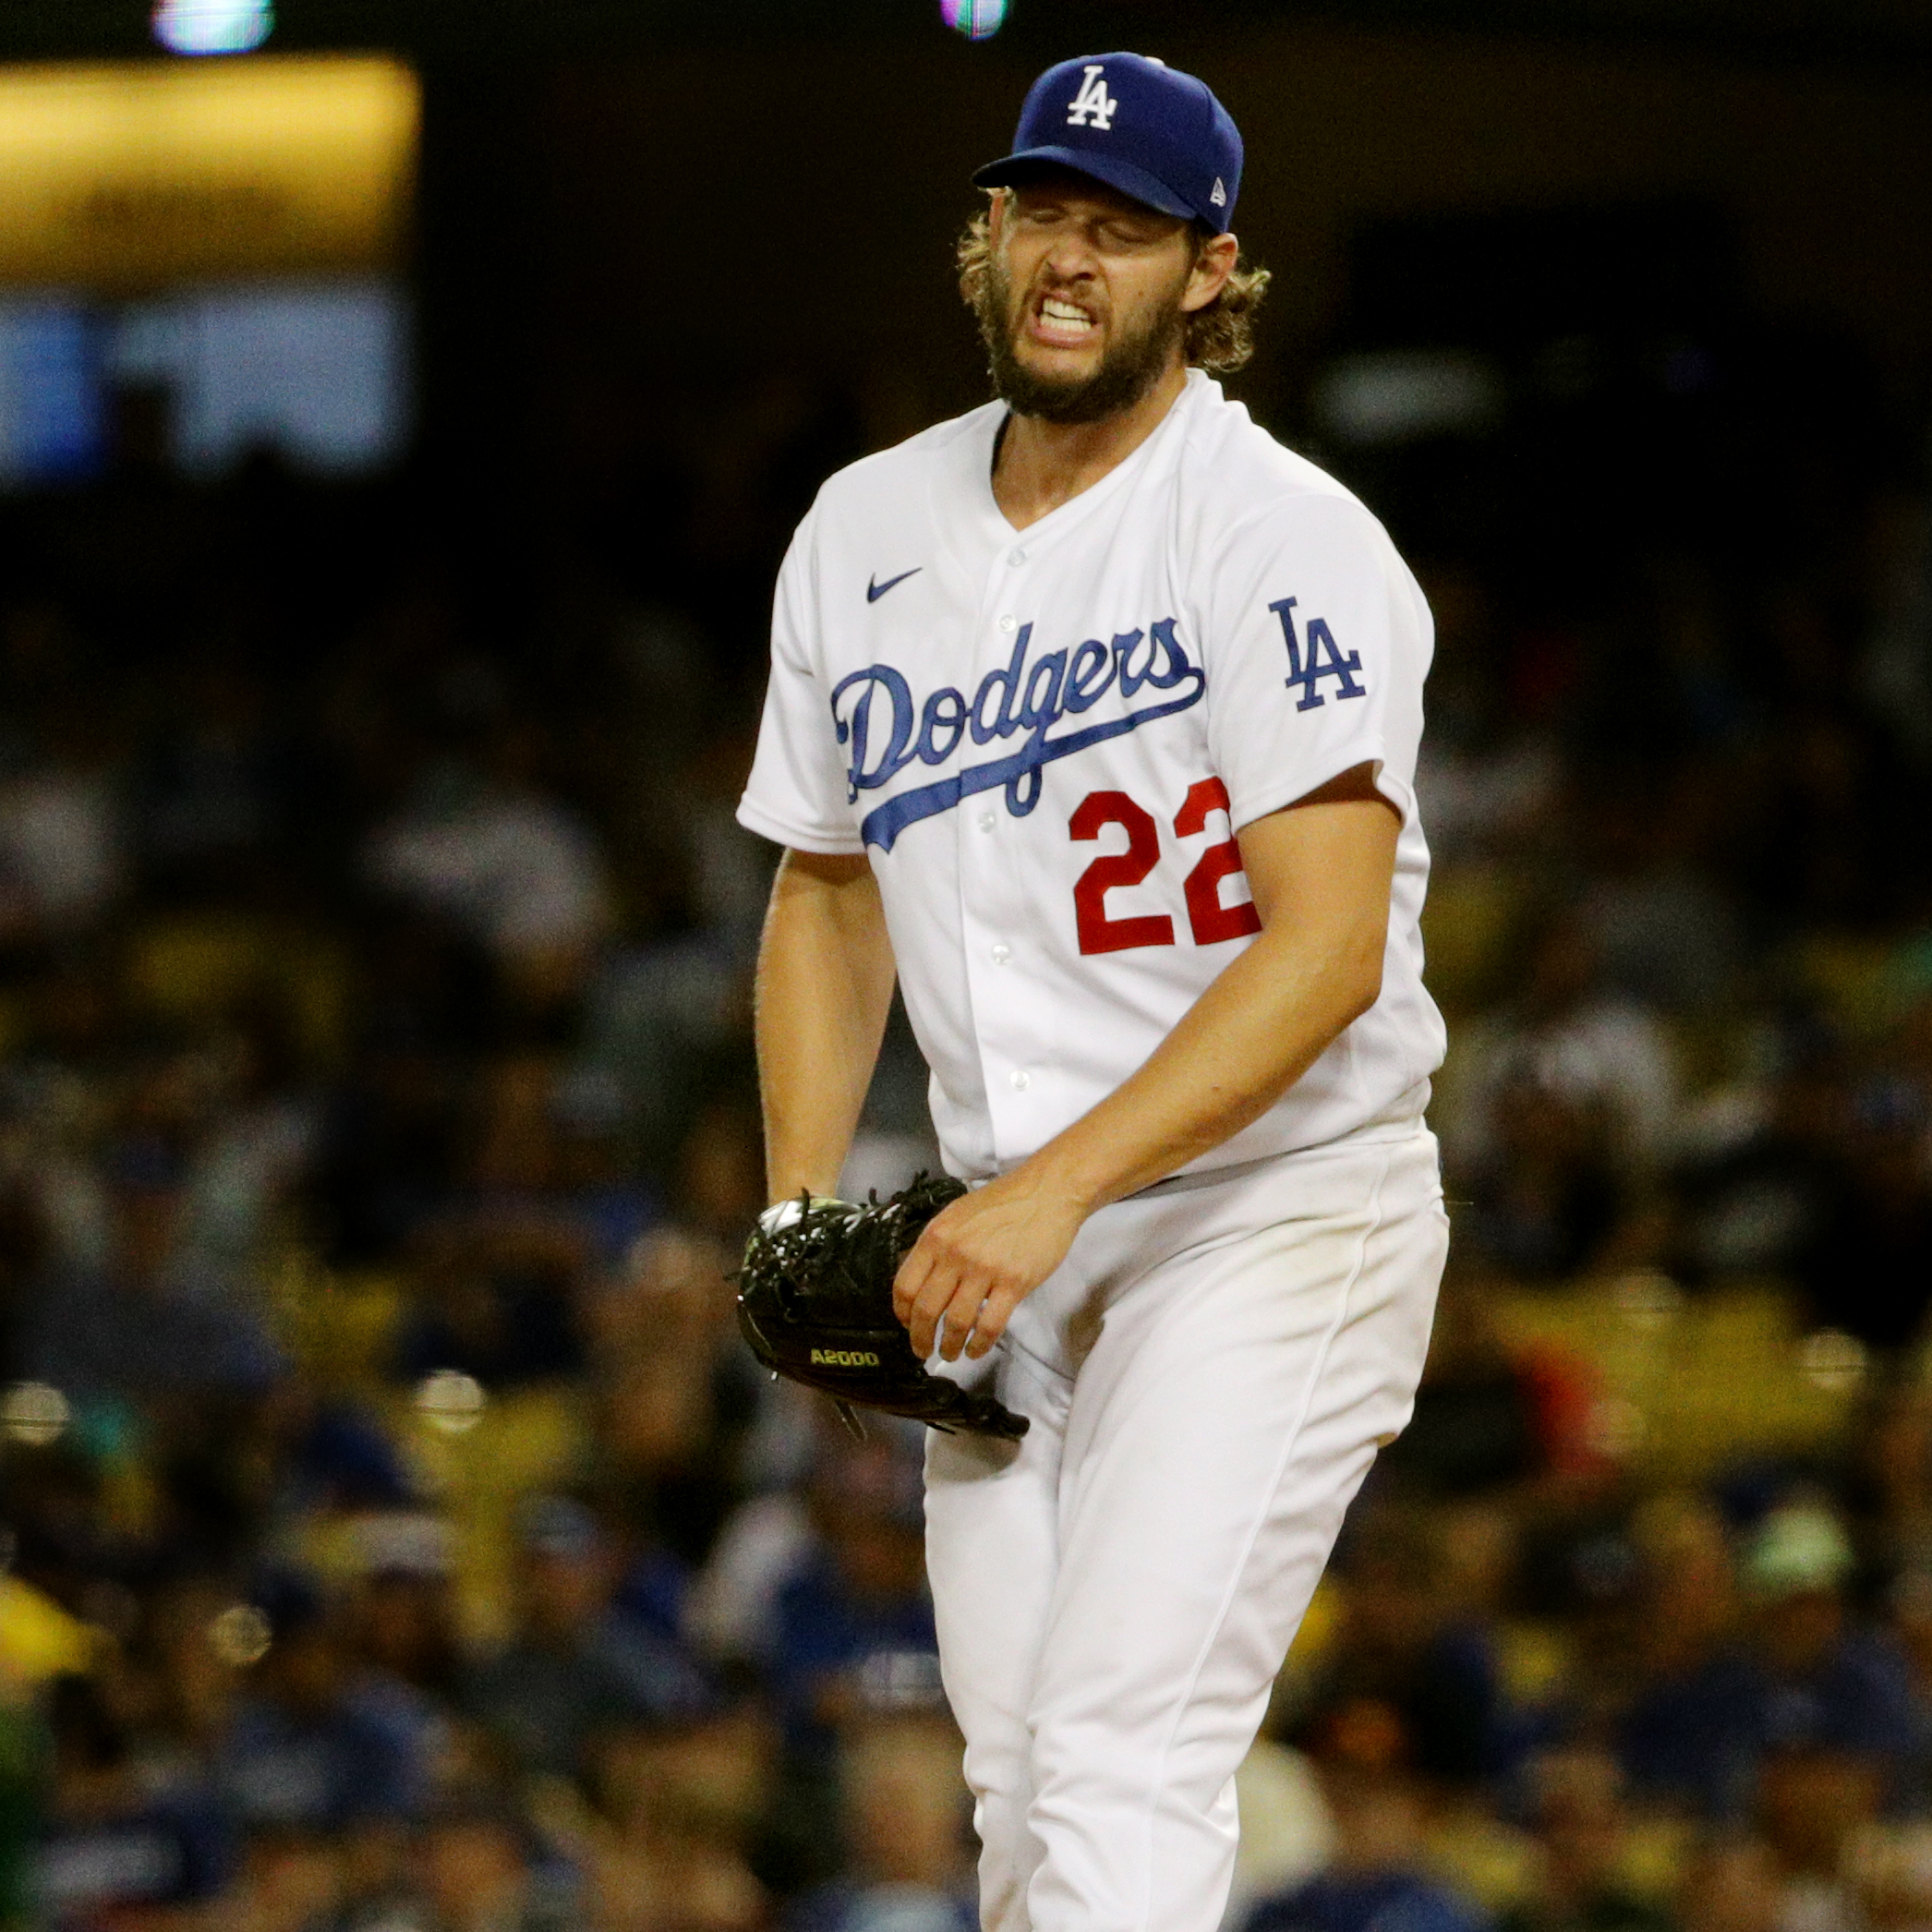 WATCH: Kike Hernandez shows off his dance moves in Dodgers dugout